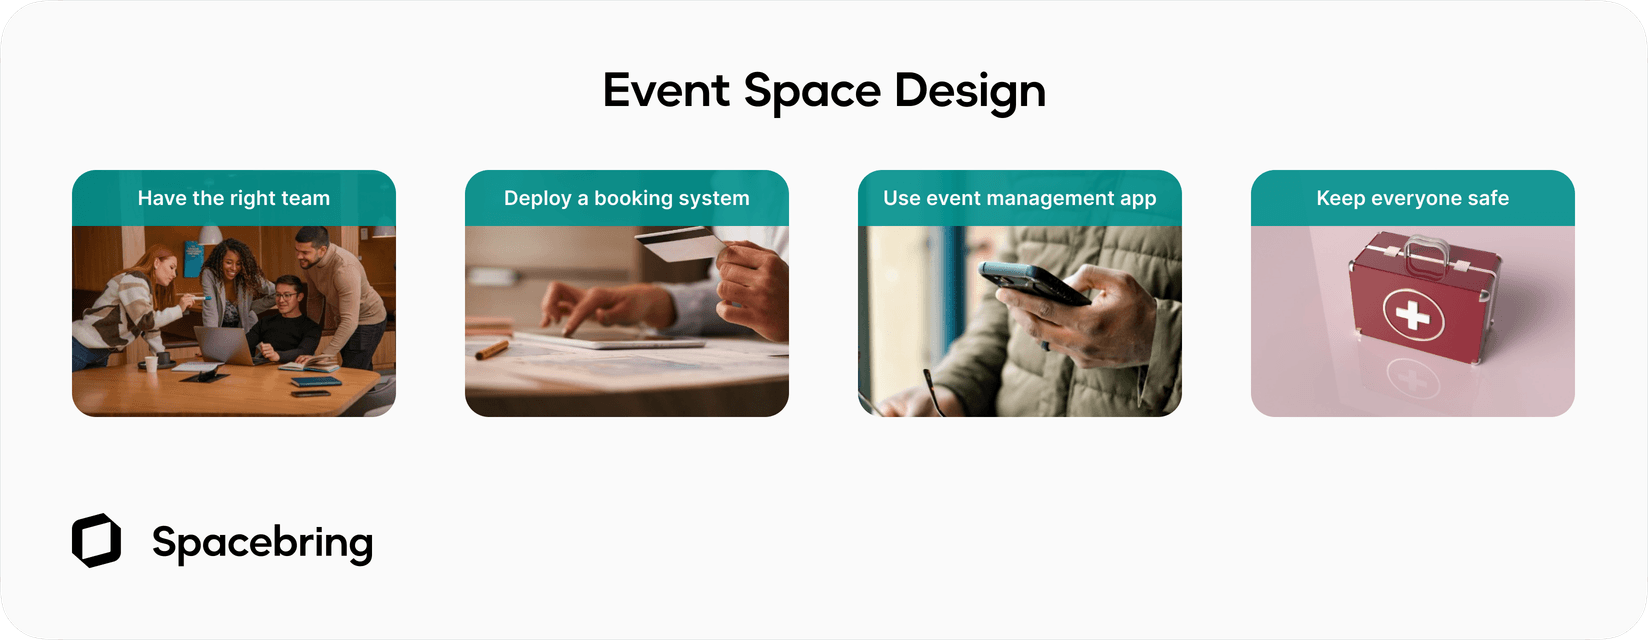 How to run event space smoothly